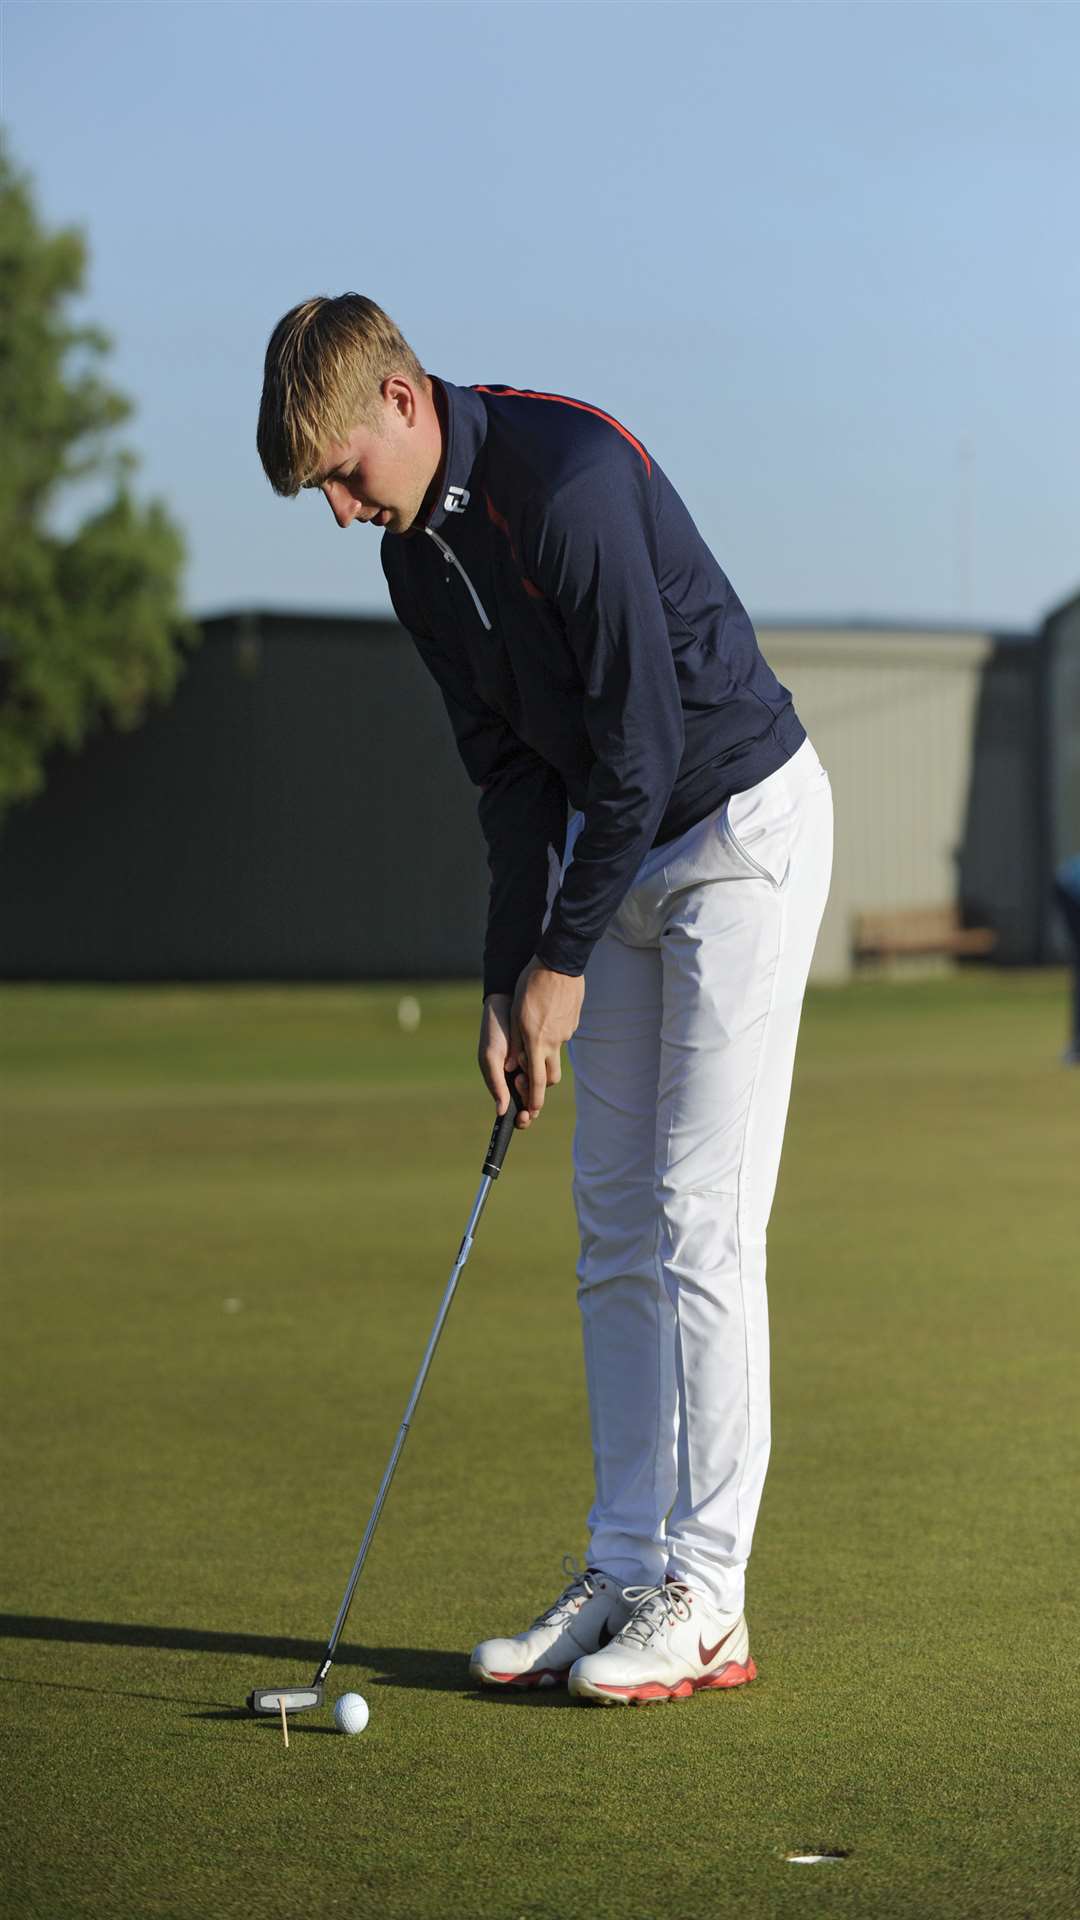 Michael Day attempts a putt during final qualifying at Royal Cinque Ports Picture: Tony Flashman